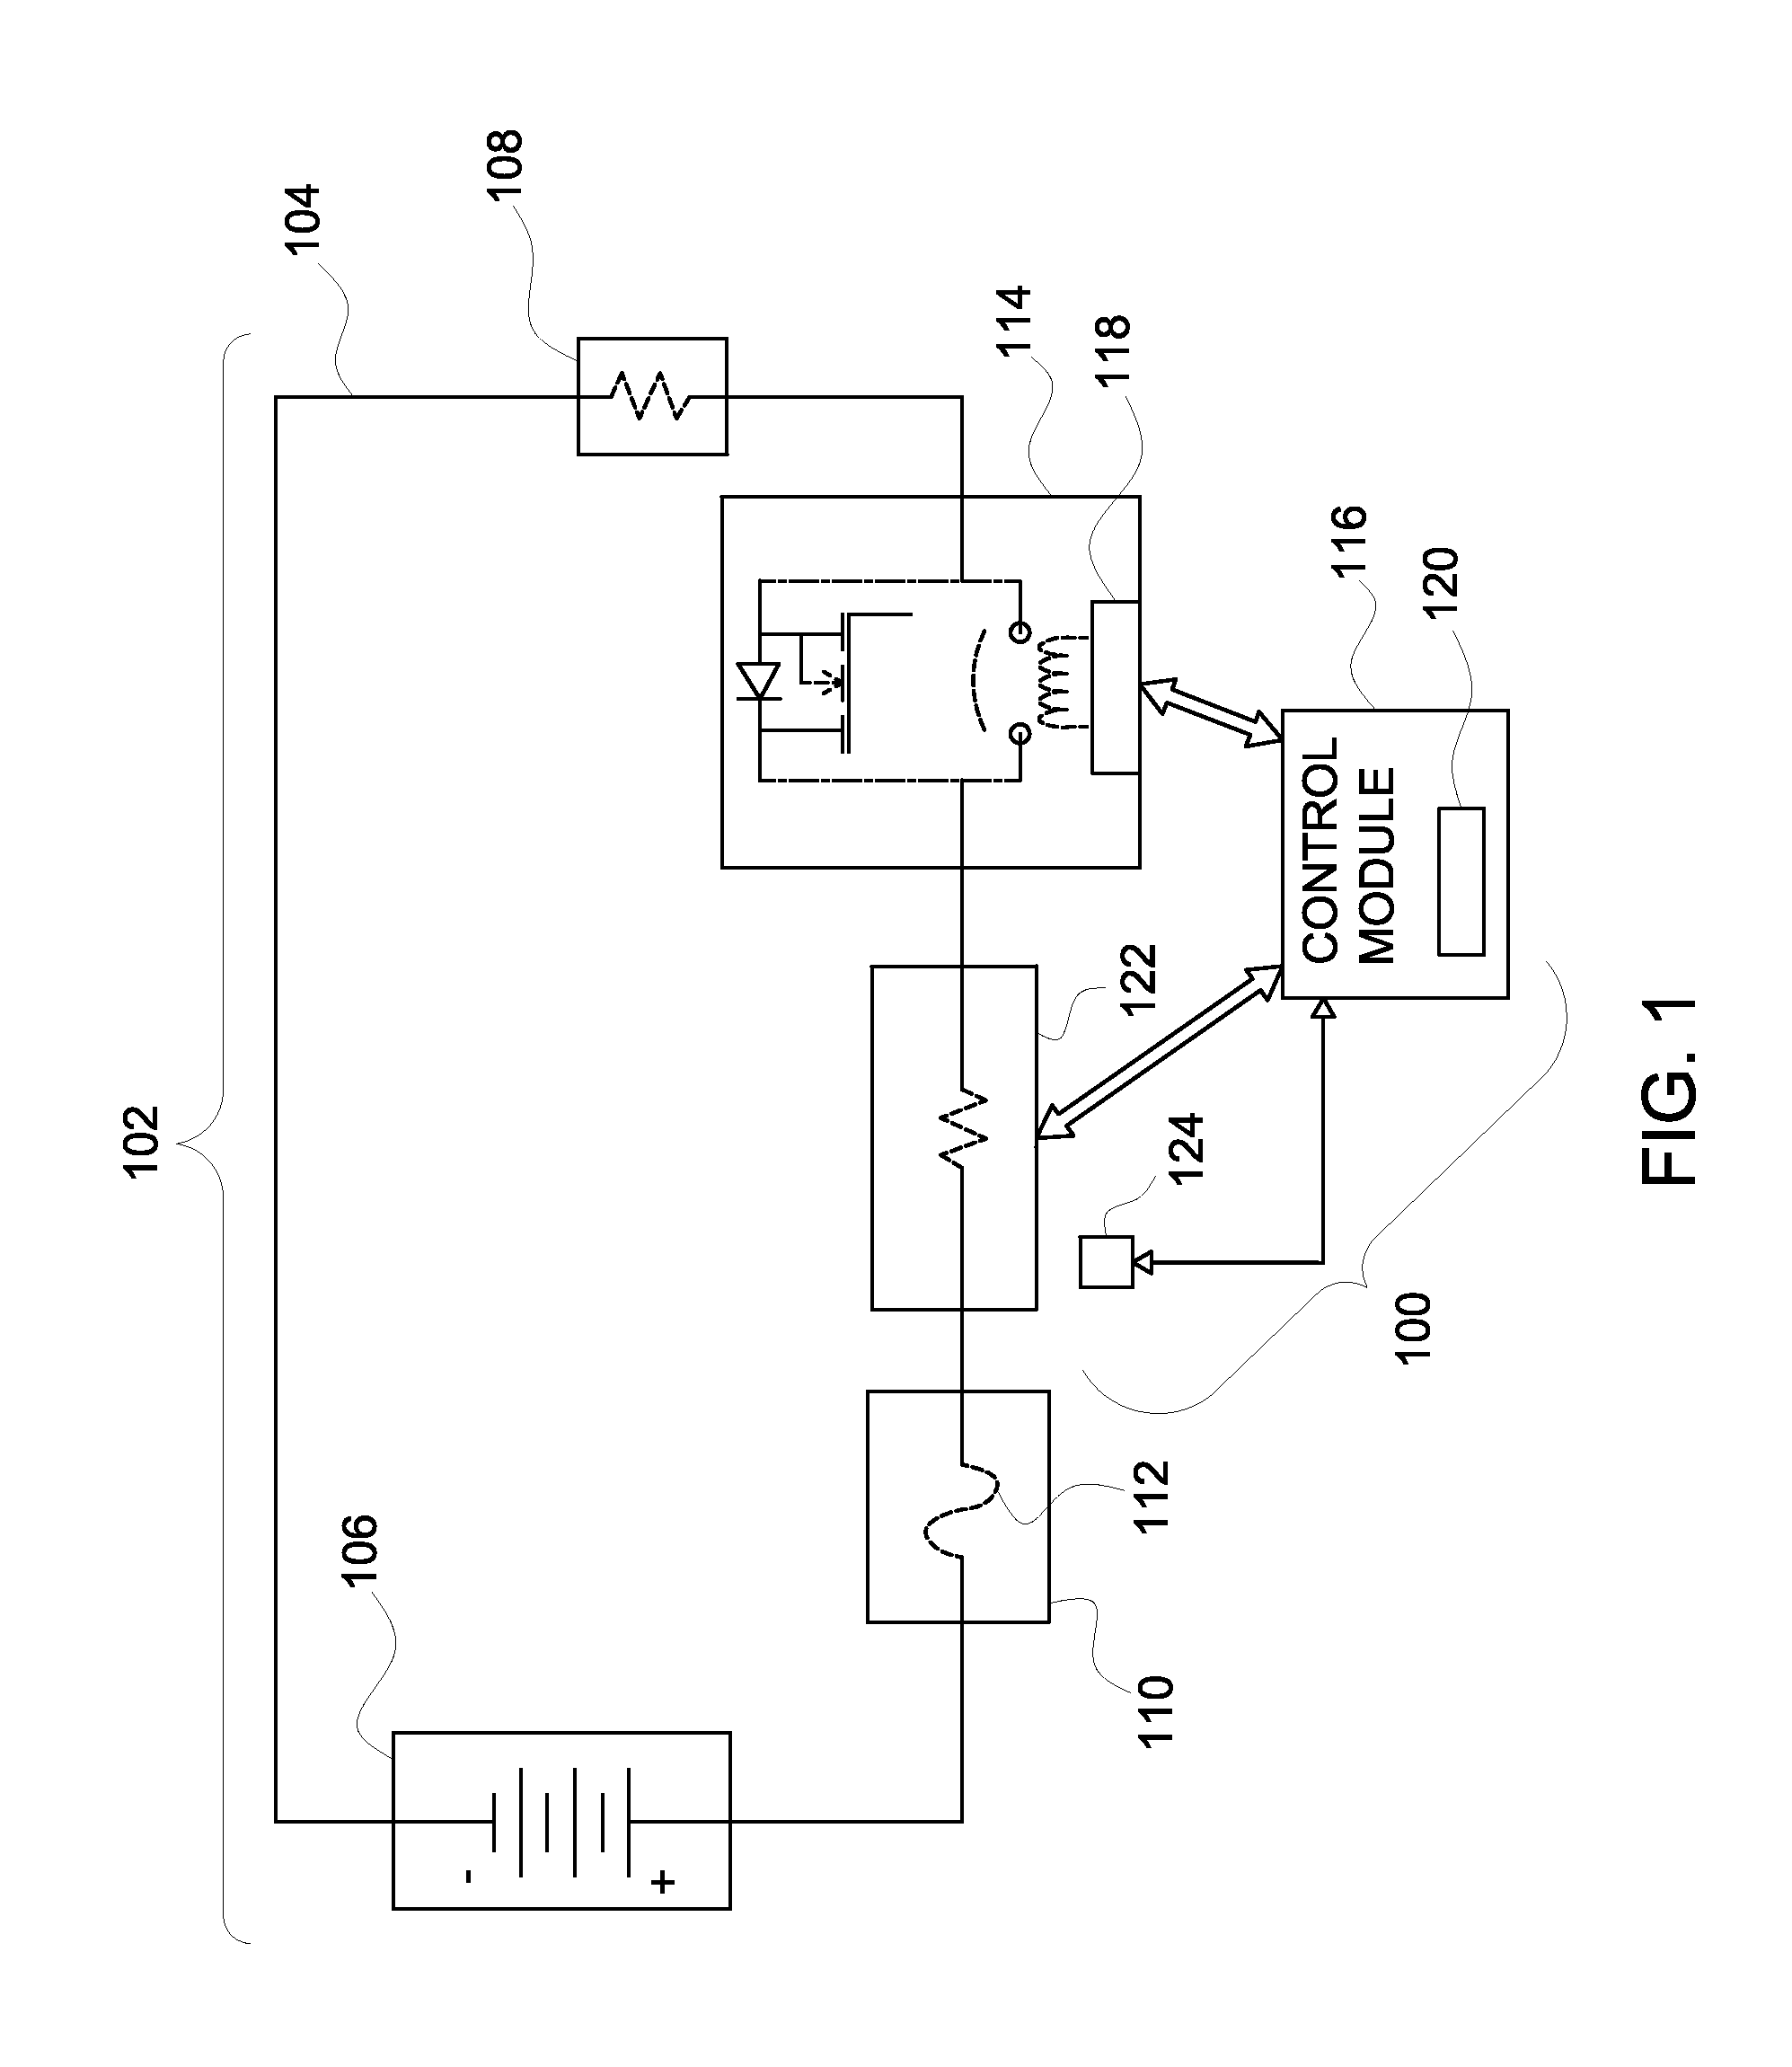 Electric circuit protection system and method for protecting an electric circuit